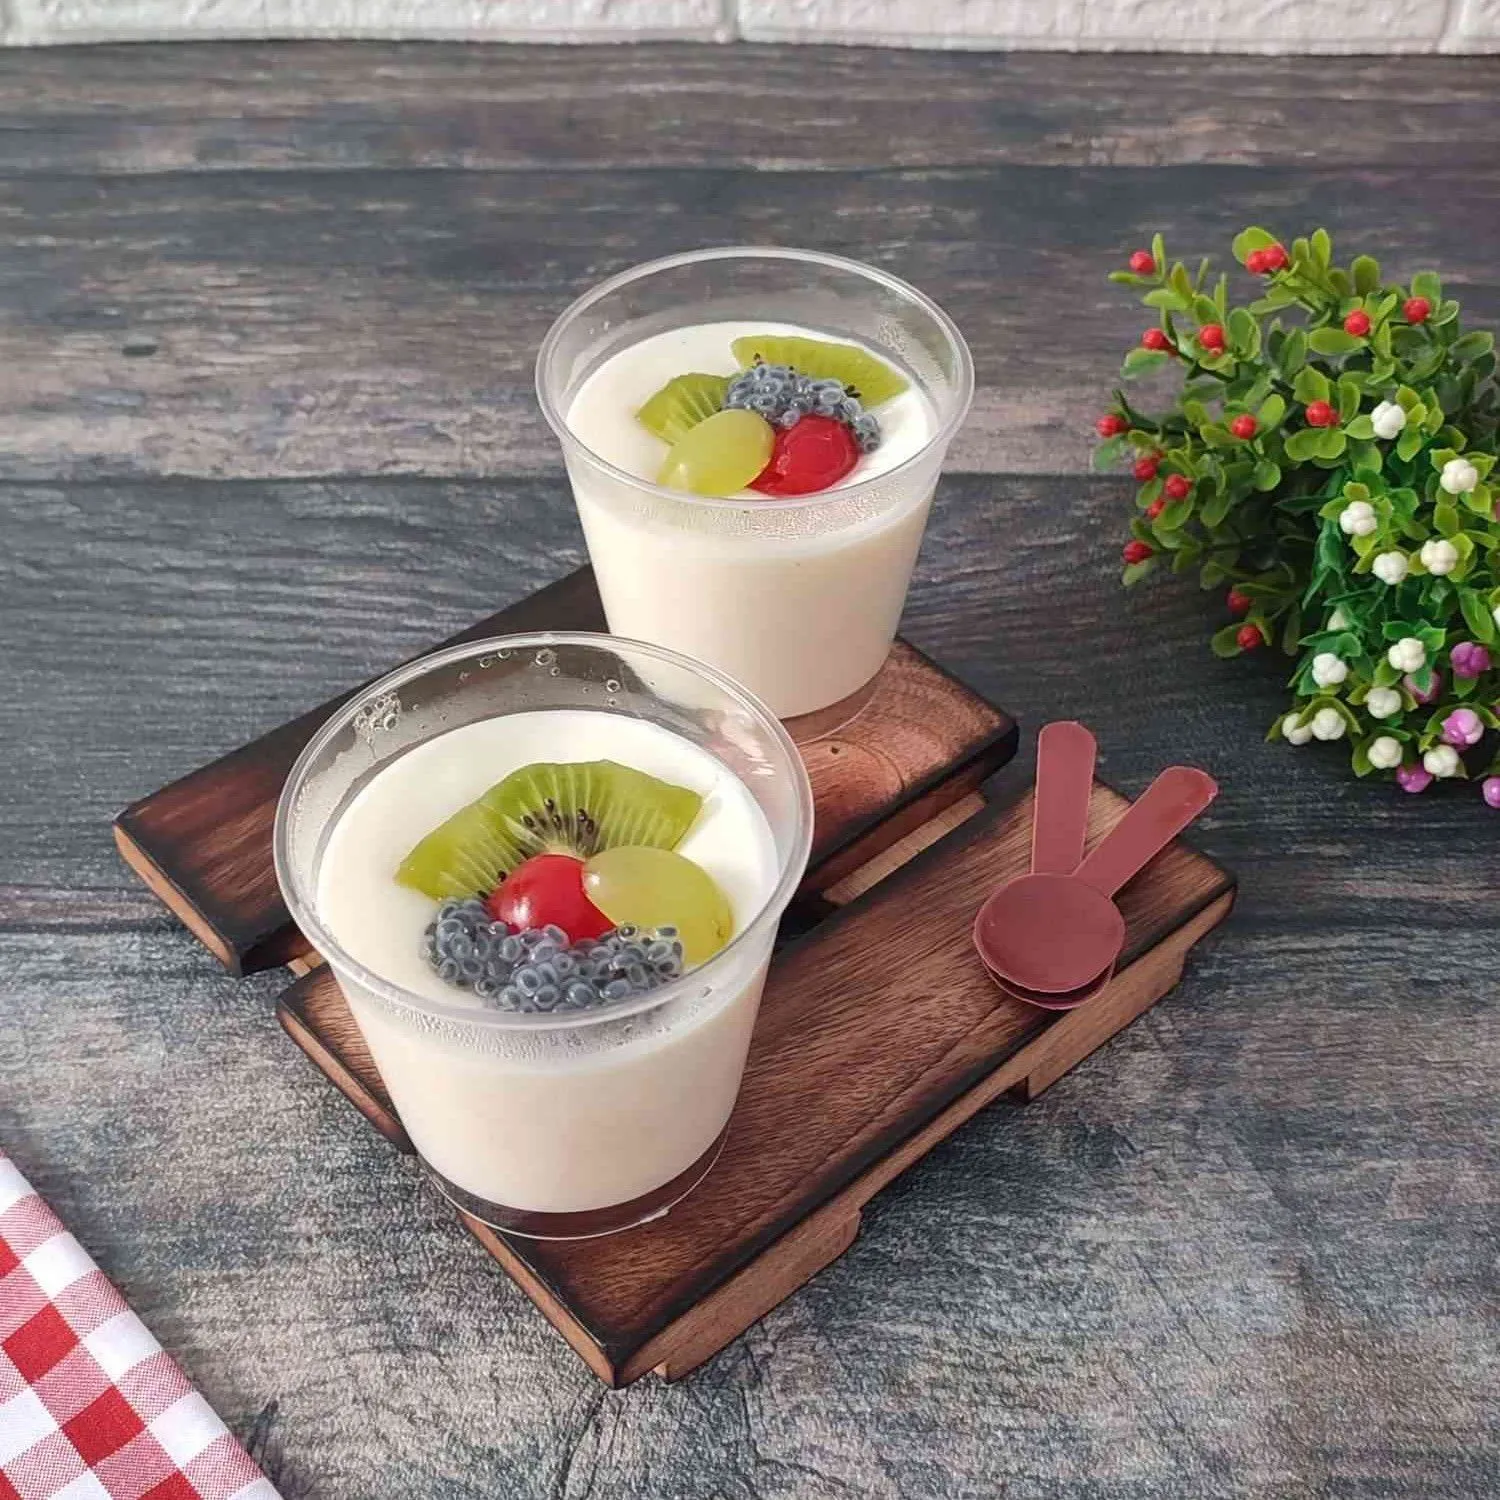 Puding Sutera Topping Buah #DiRecookYummy